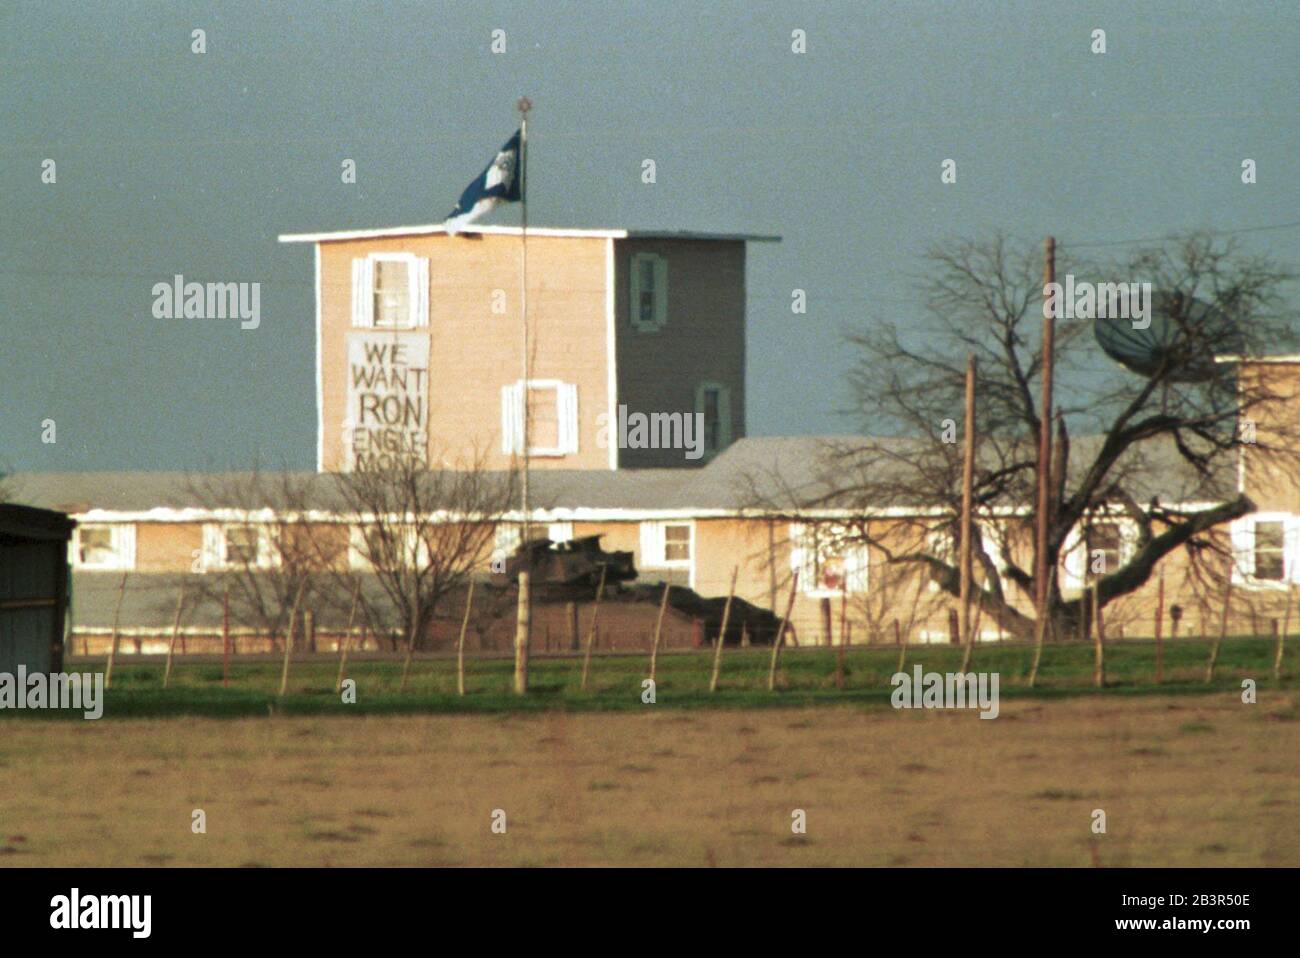 Waco Texas USA, March 1993: A U.S. Army tank drives past the Branch Davidian compound near Waco, Texas during the 51-day standoff between sect members and federal law enforcement agents. ©Bob Daemmrich Stock Photo